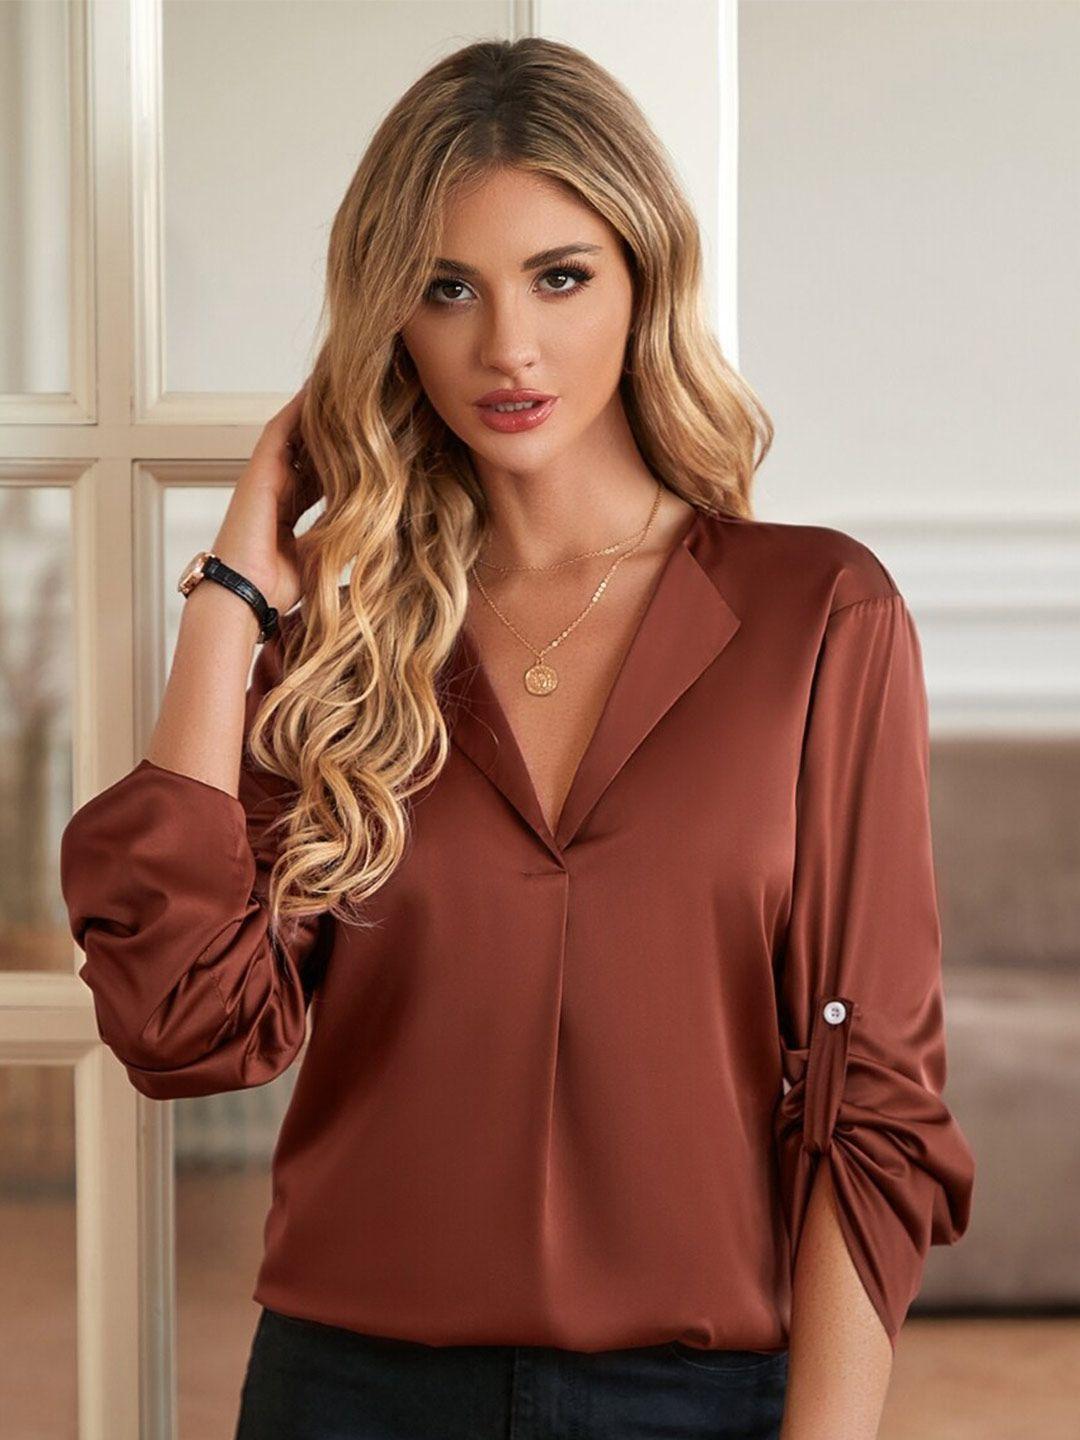 stylecast brown shirt collar roll-up sleeves shirt style top